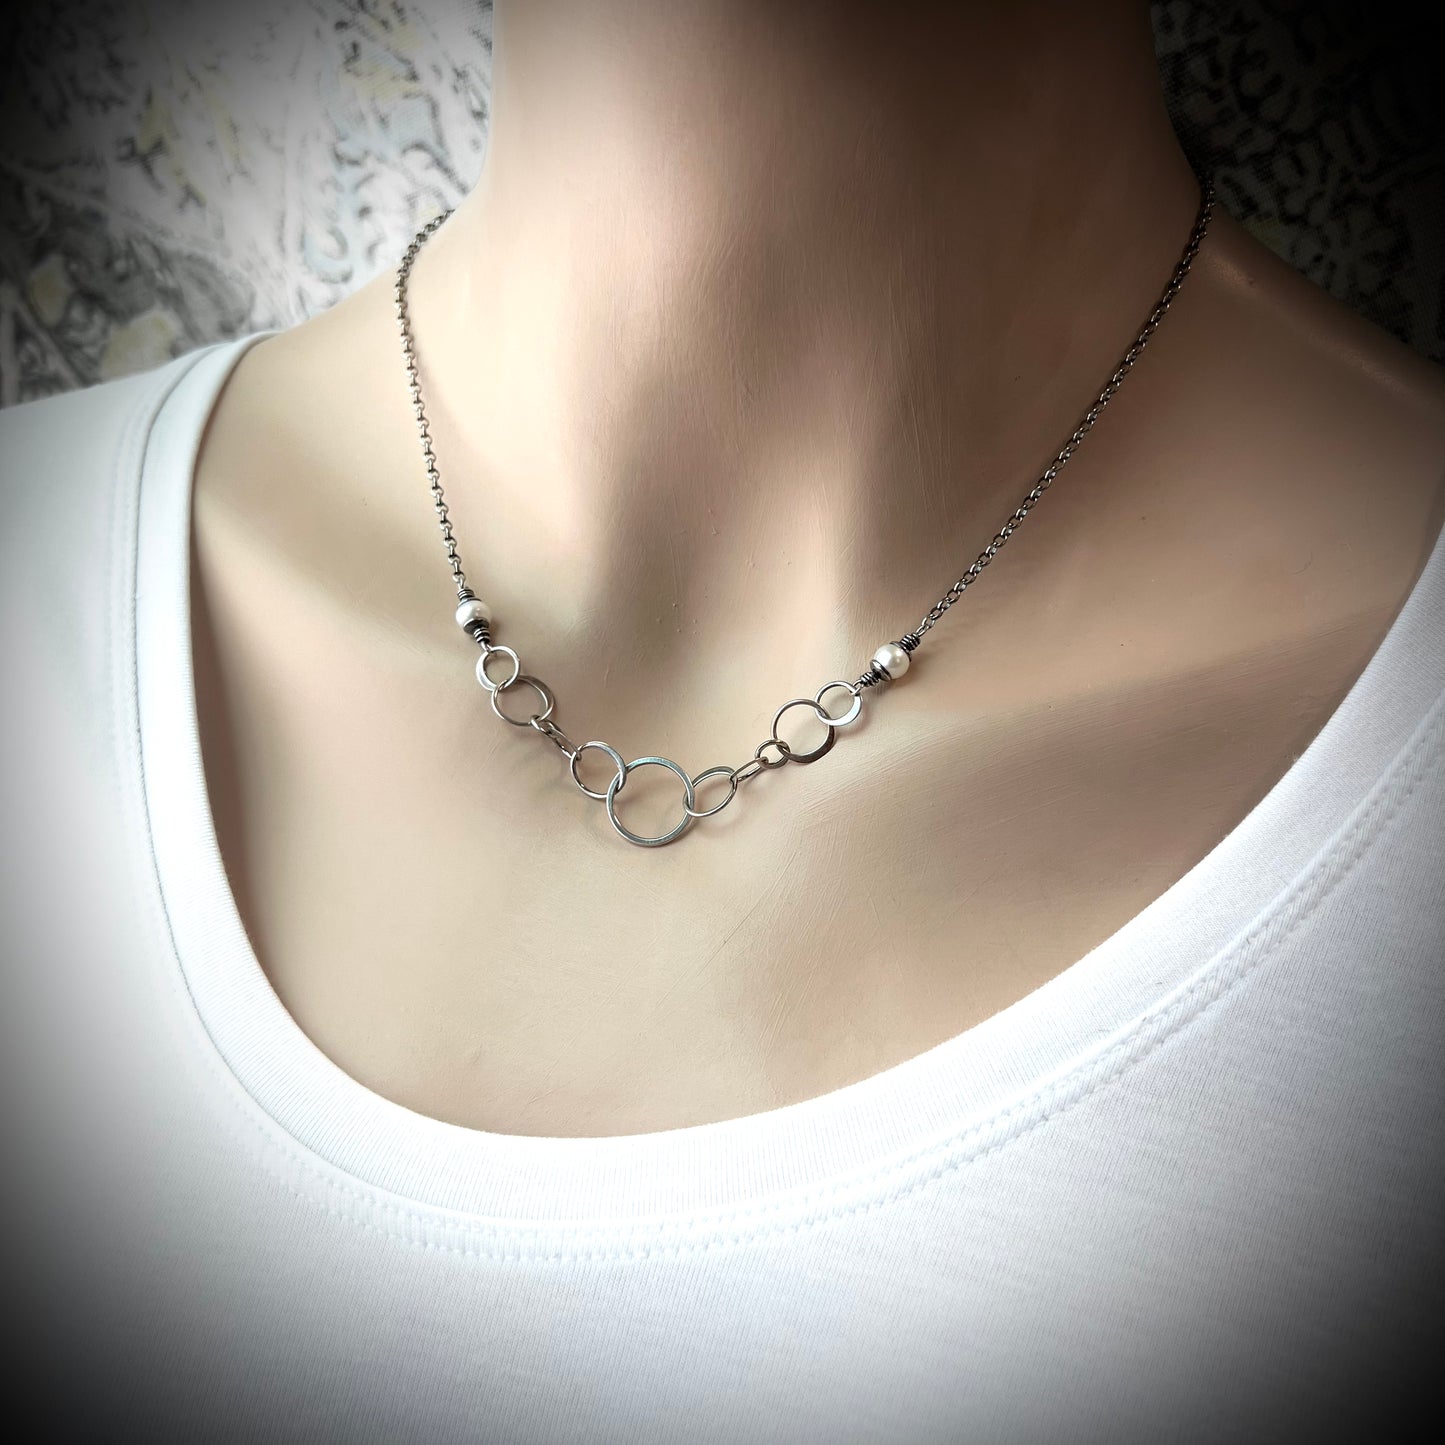 Pearl Sterling Silver Necklace - Genuine Freshwater Pearl and Sterling Silver Chain Necklace